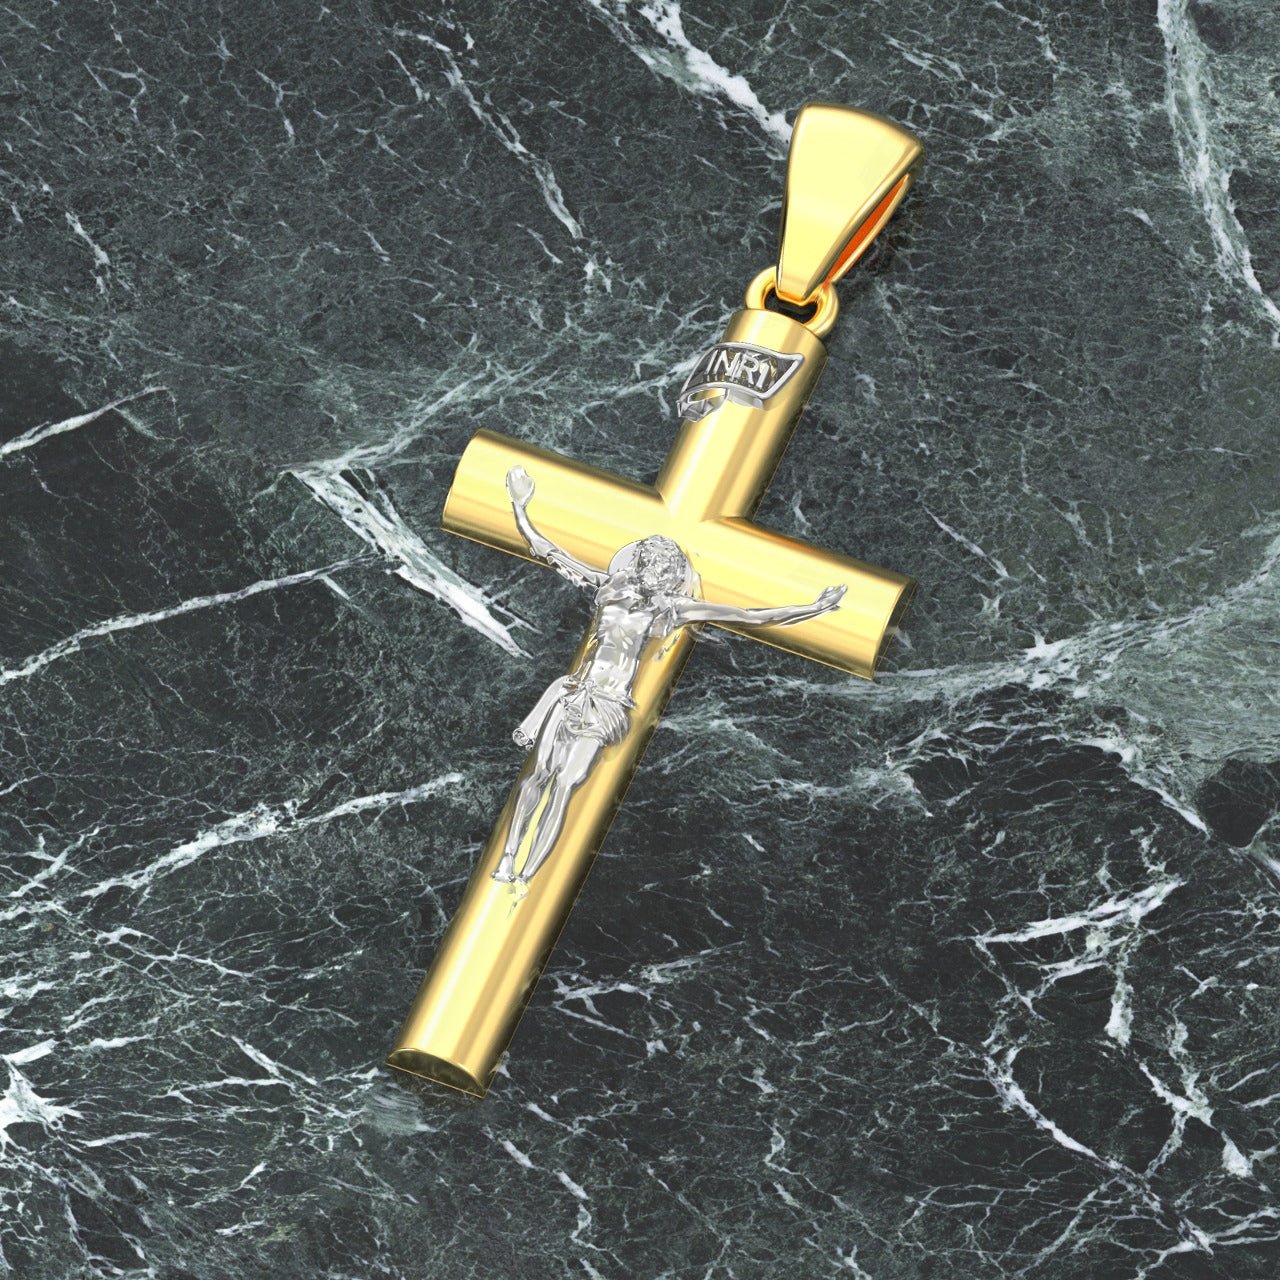 Crucifix Necklace - Cross Pendant Necklace In Two Tone